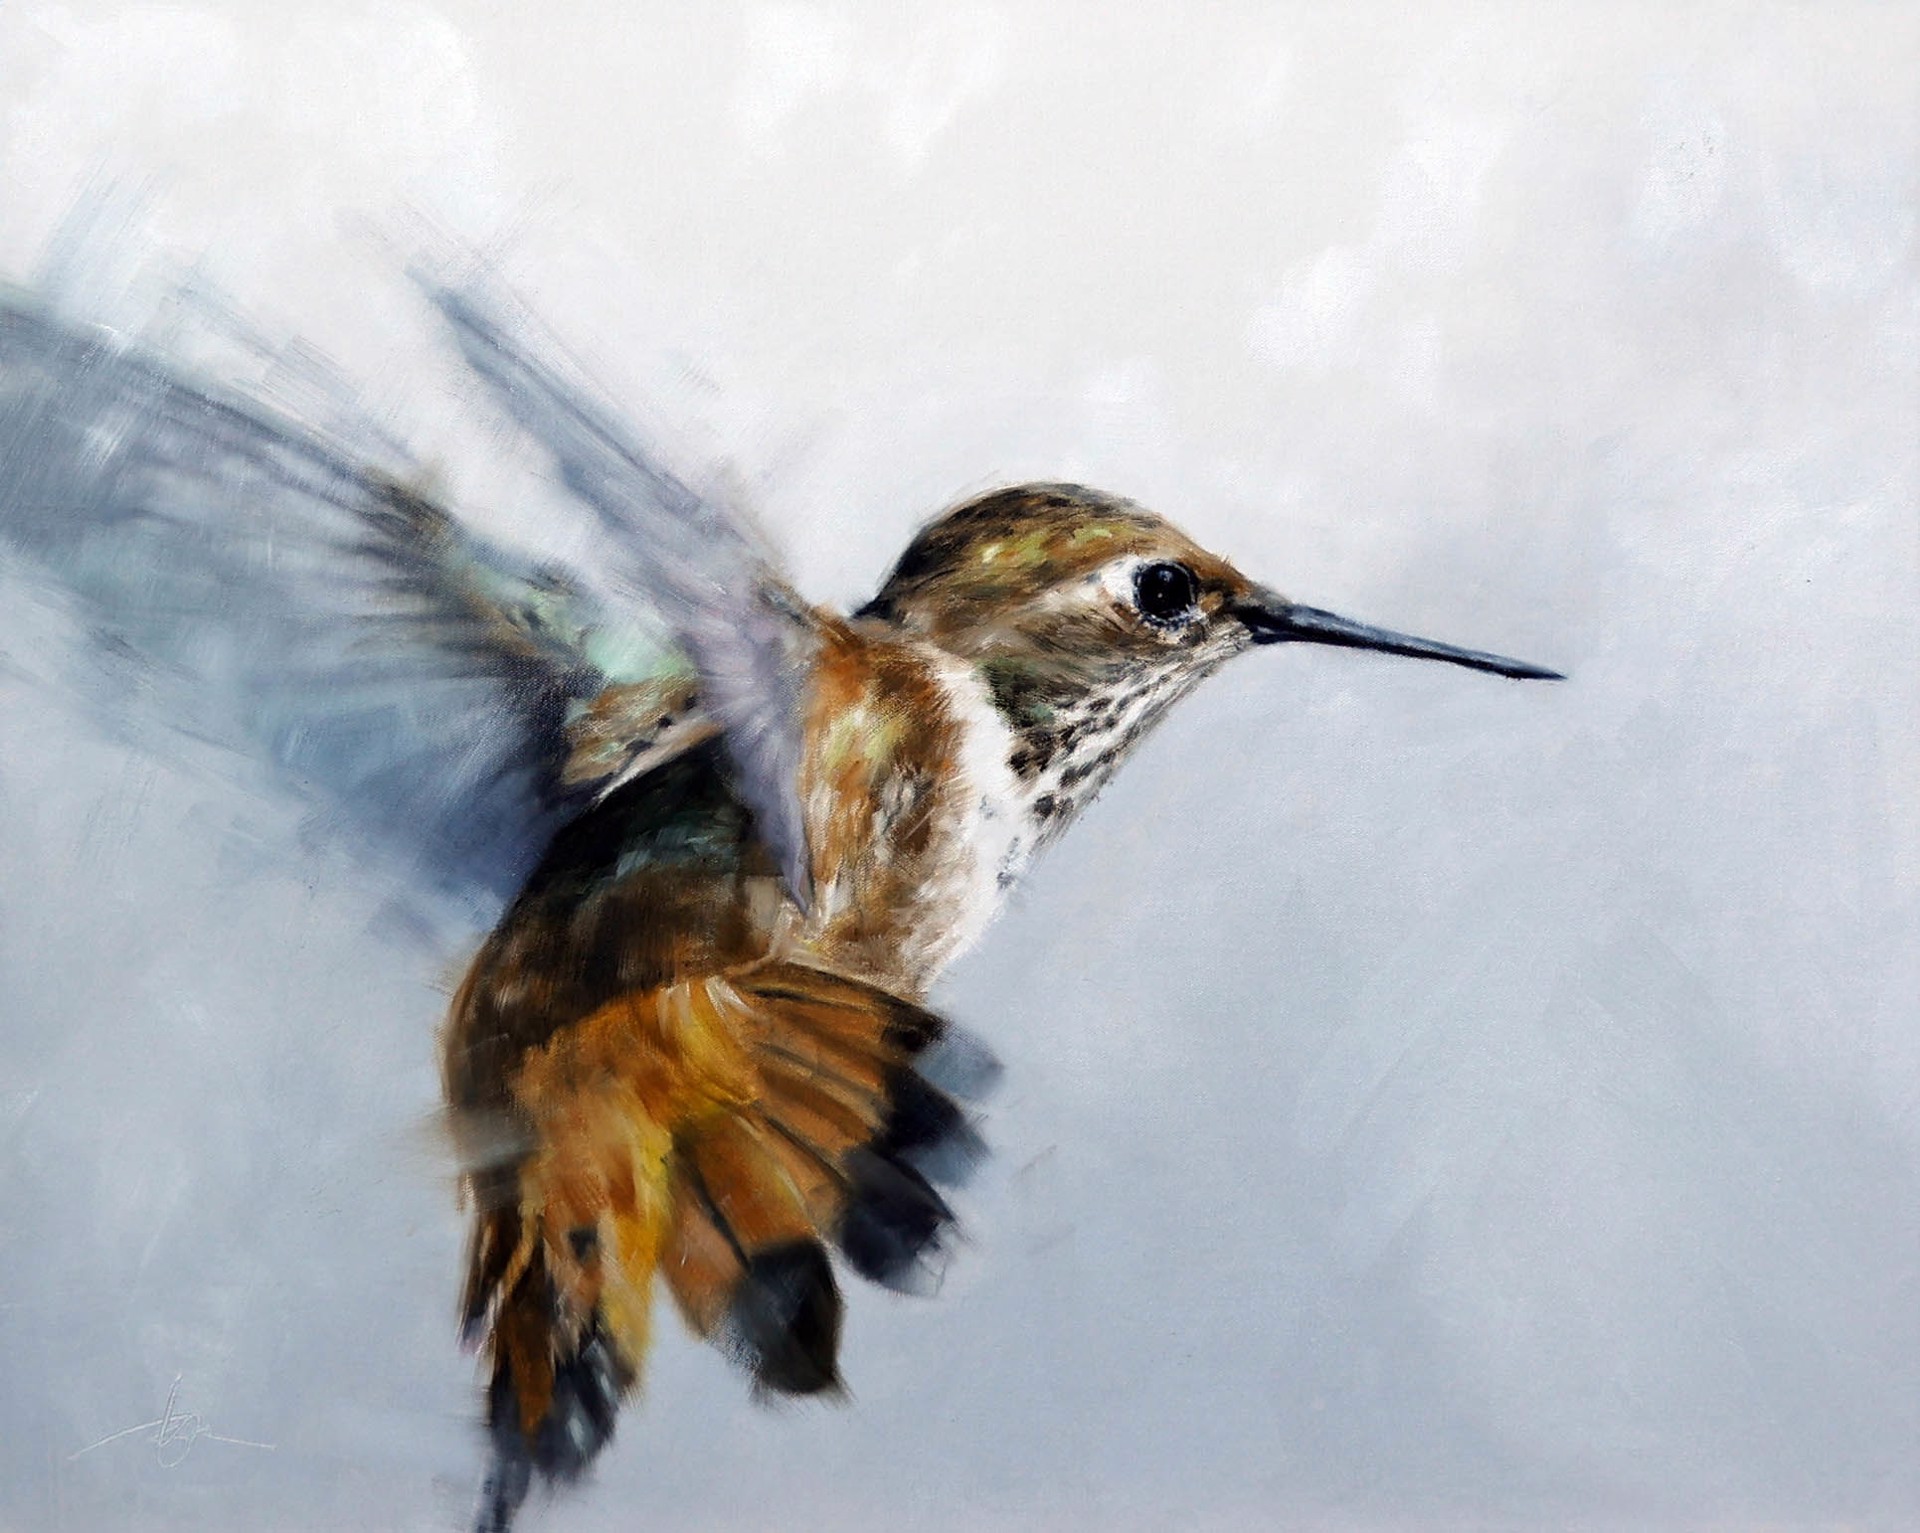 Original Oil Painting By Doyle Hostetler Featuring A Hummingbird In Flight In A Muted Color Palette